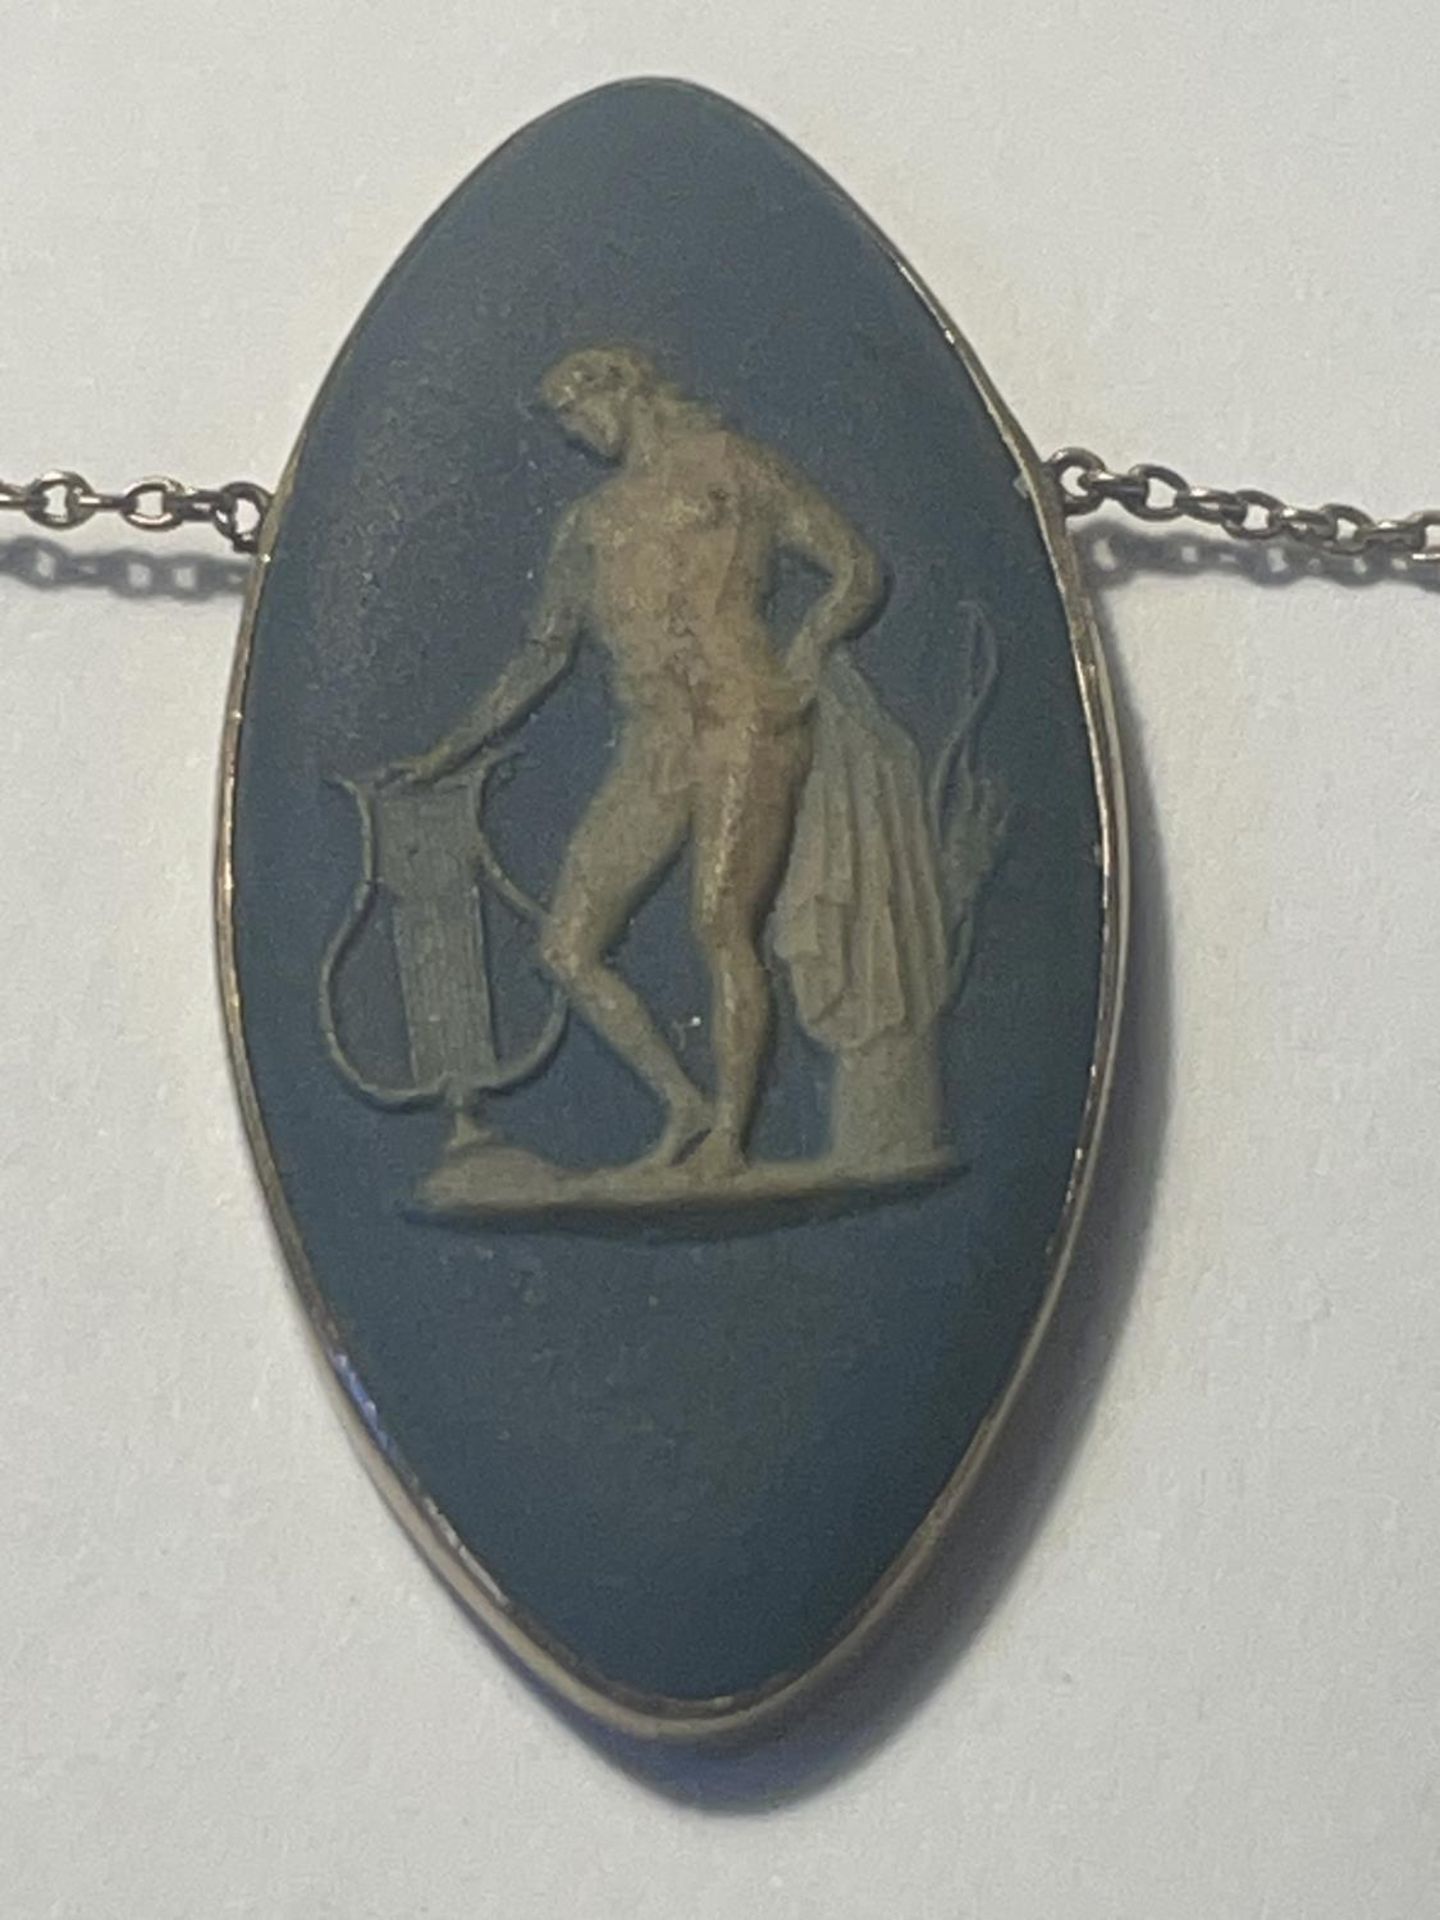 A BLUE WEDGWOOD JASPERWARE PLAQUE IN A MARKED 9 CARAT GOLD SURROUND WITH SIDE CHAINS - Image 2 of 4